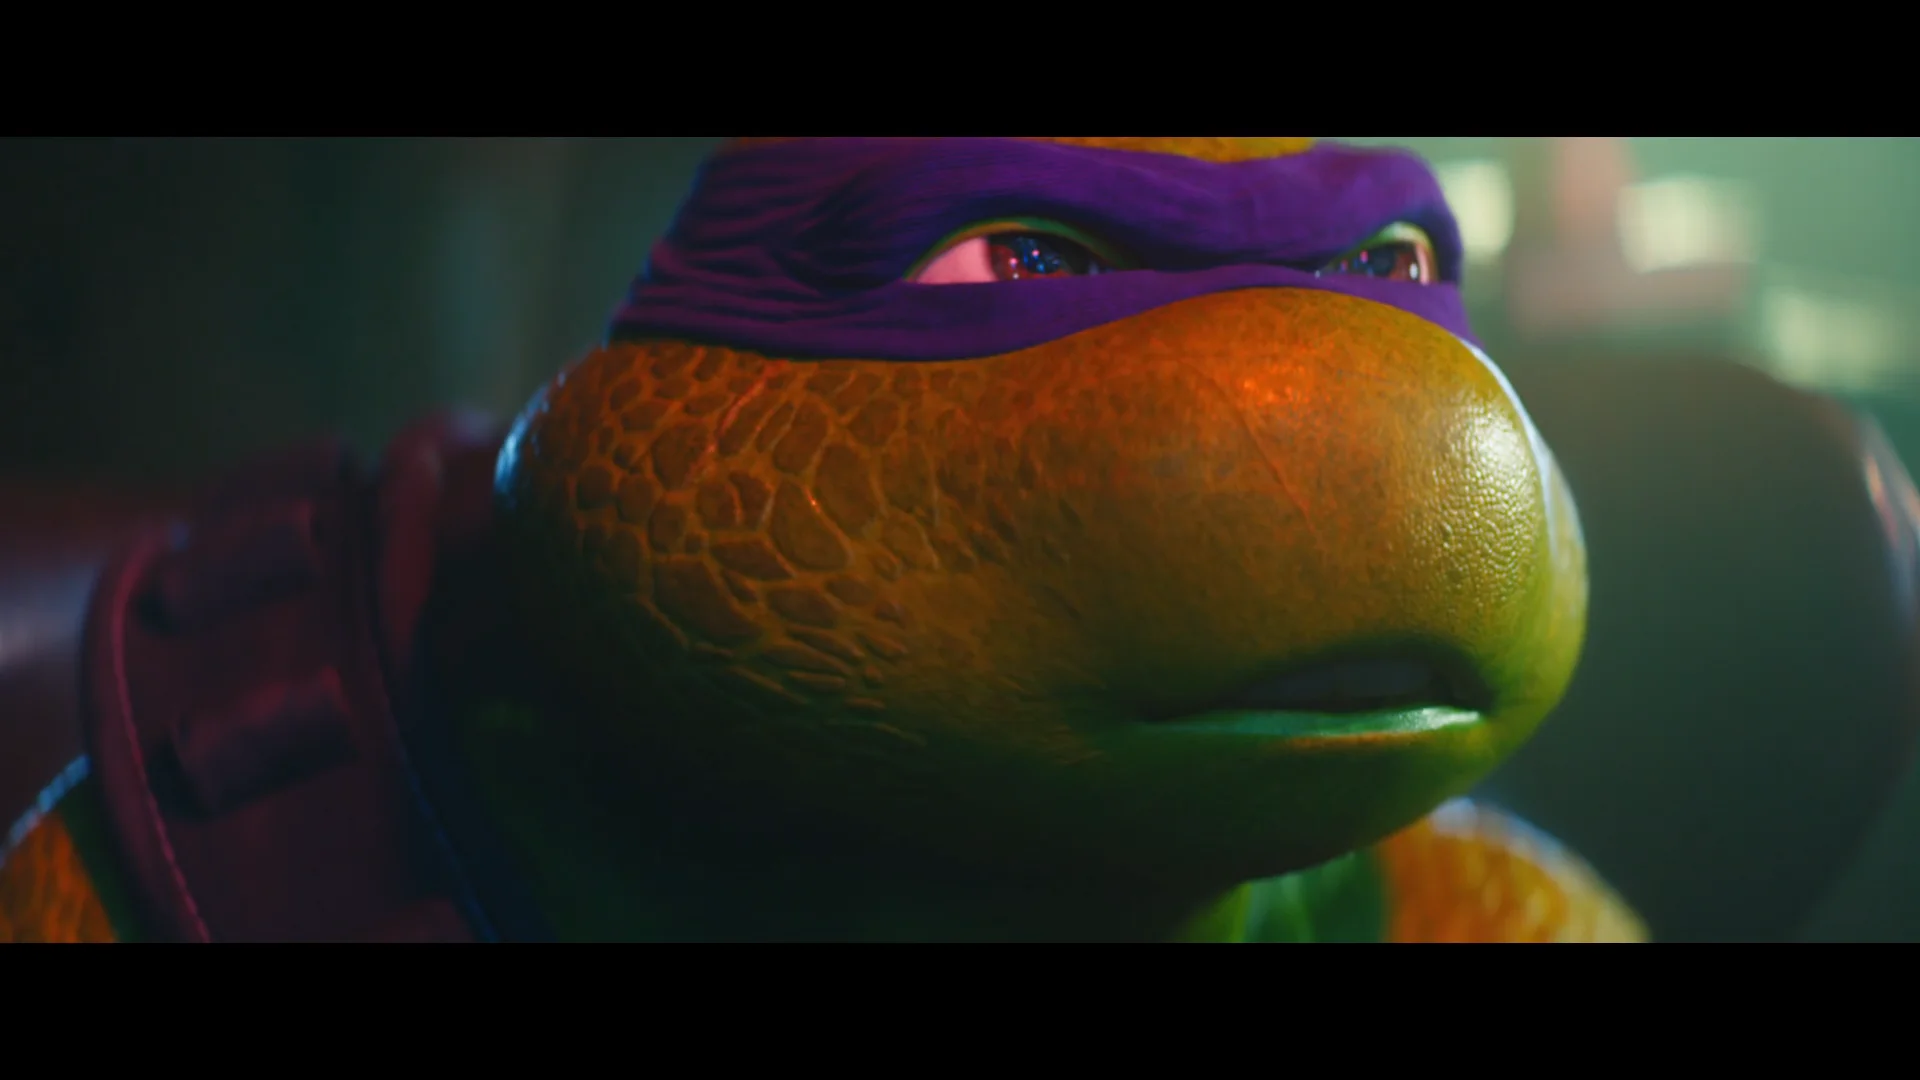 TMNT 2012 - We'll be right back on Vimeo